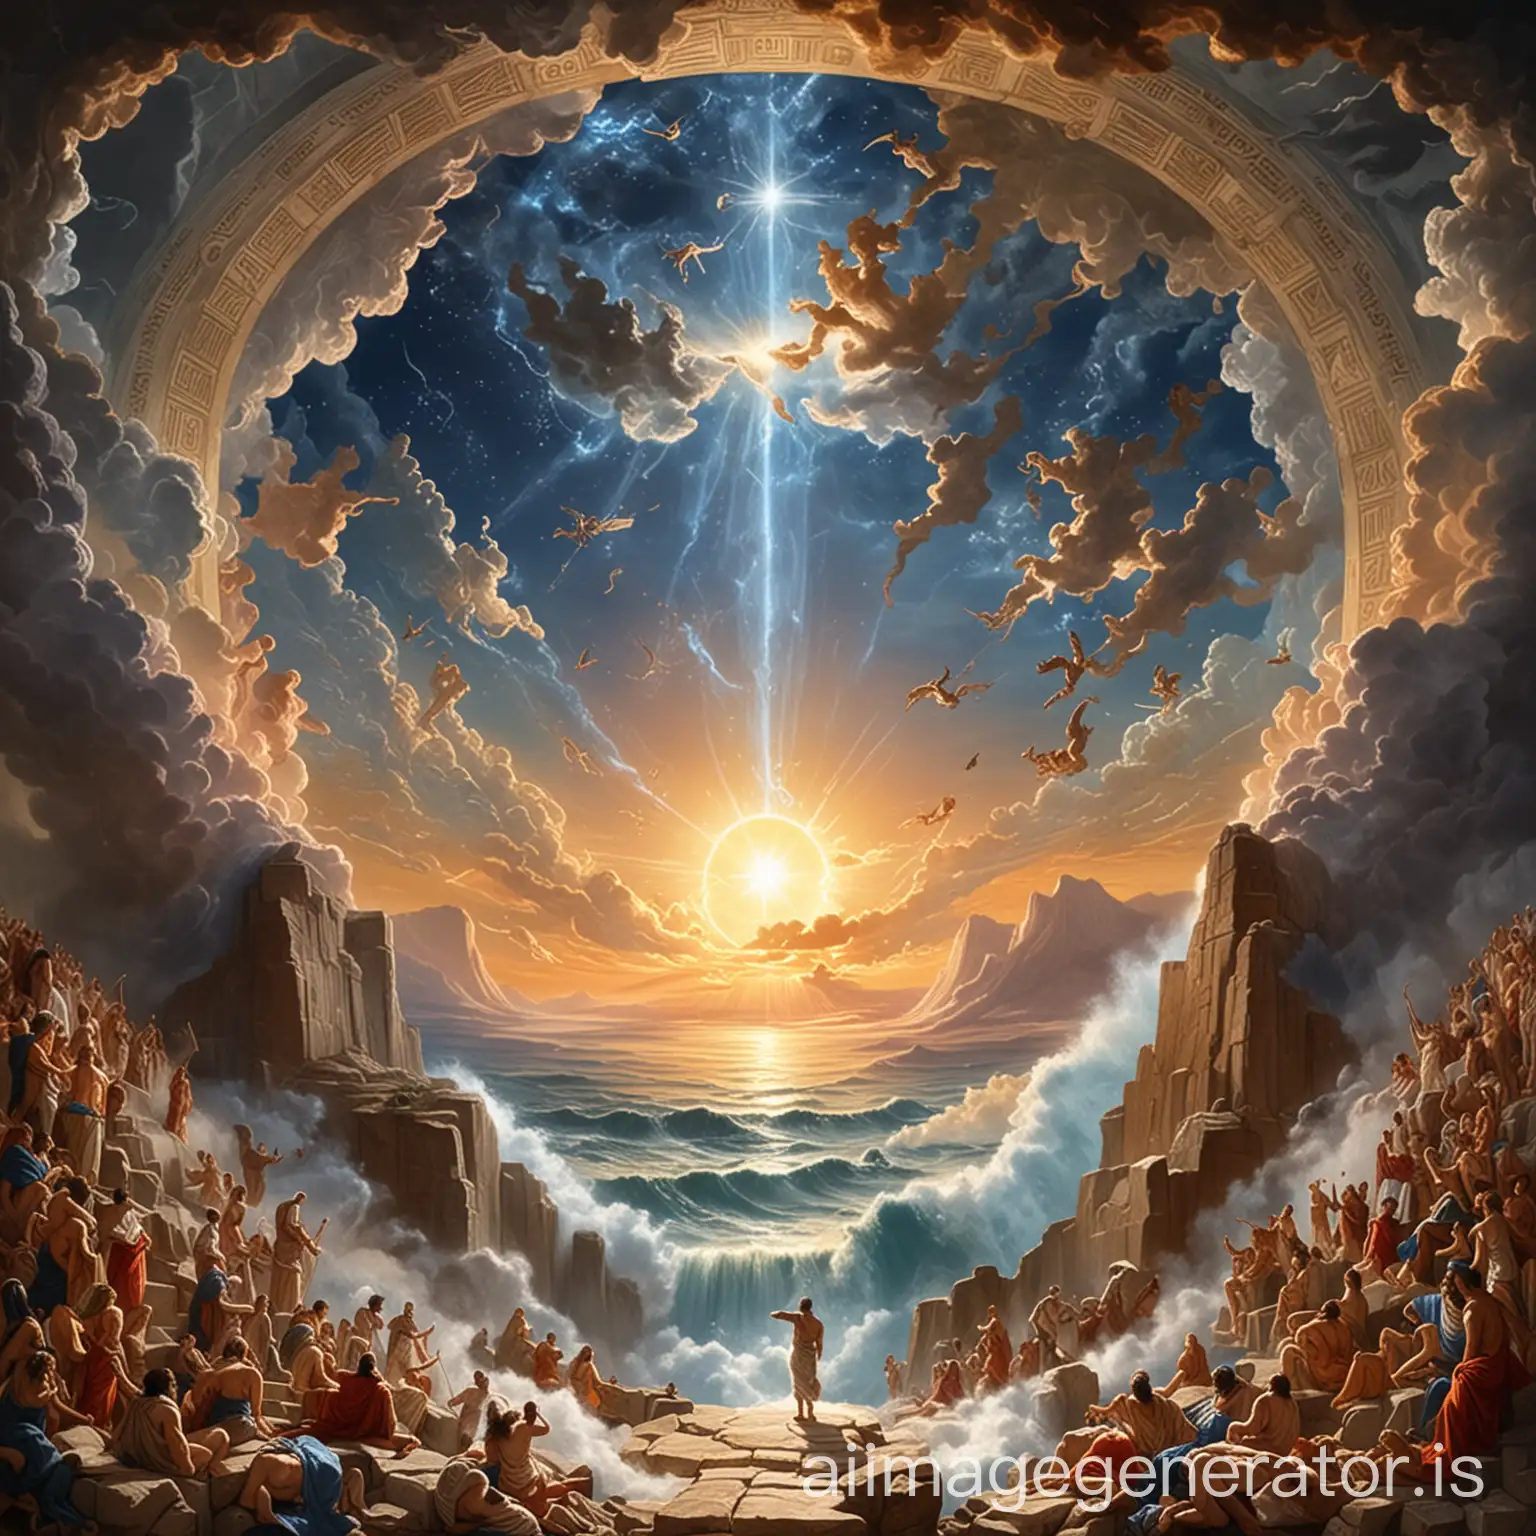 In the beginning, God created the heavens and the earth according to the Bible and Greek-Roman mythology. Draw the background picture.